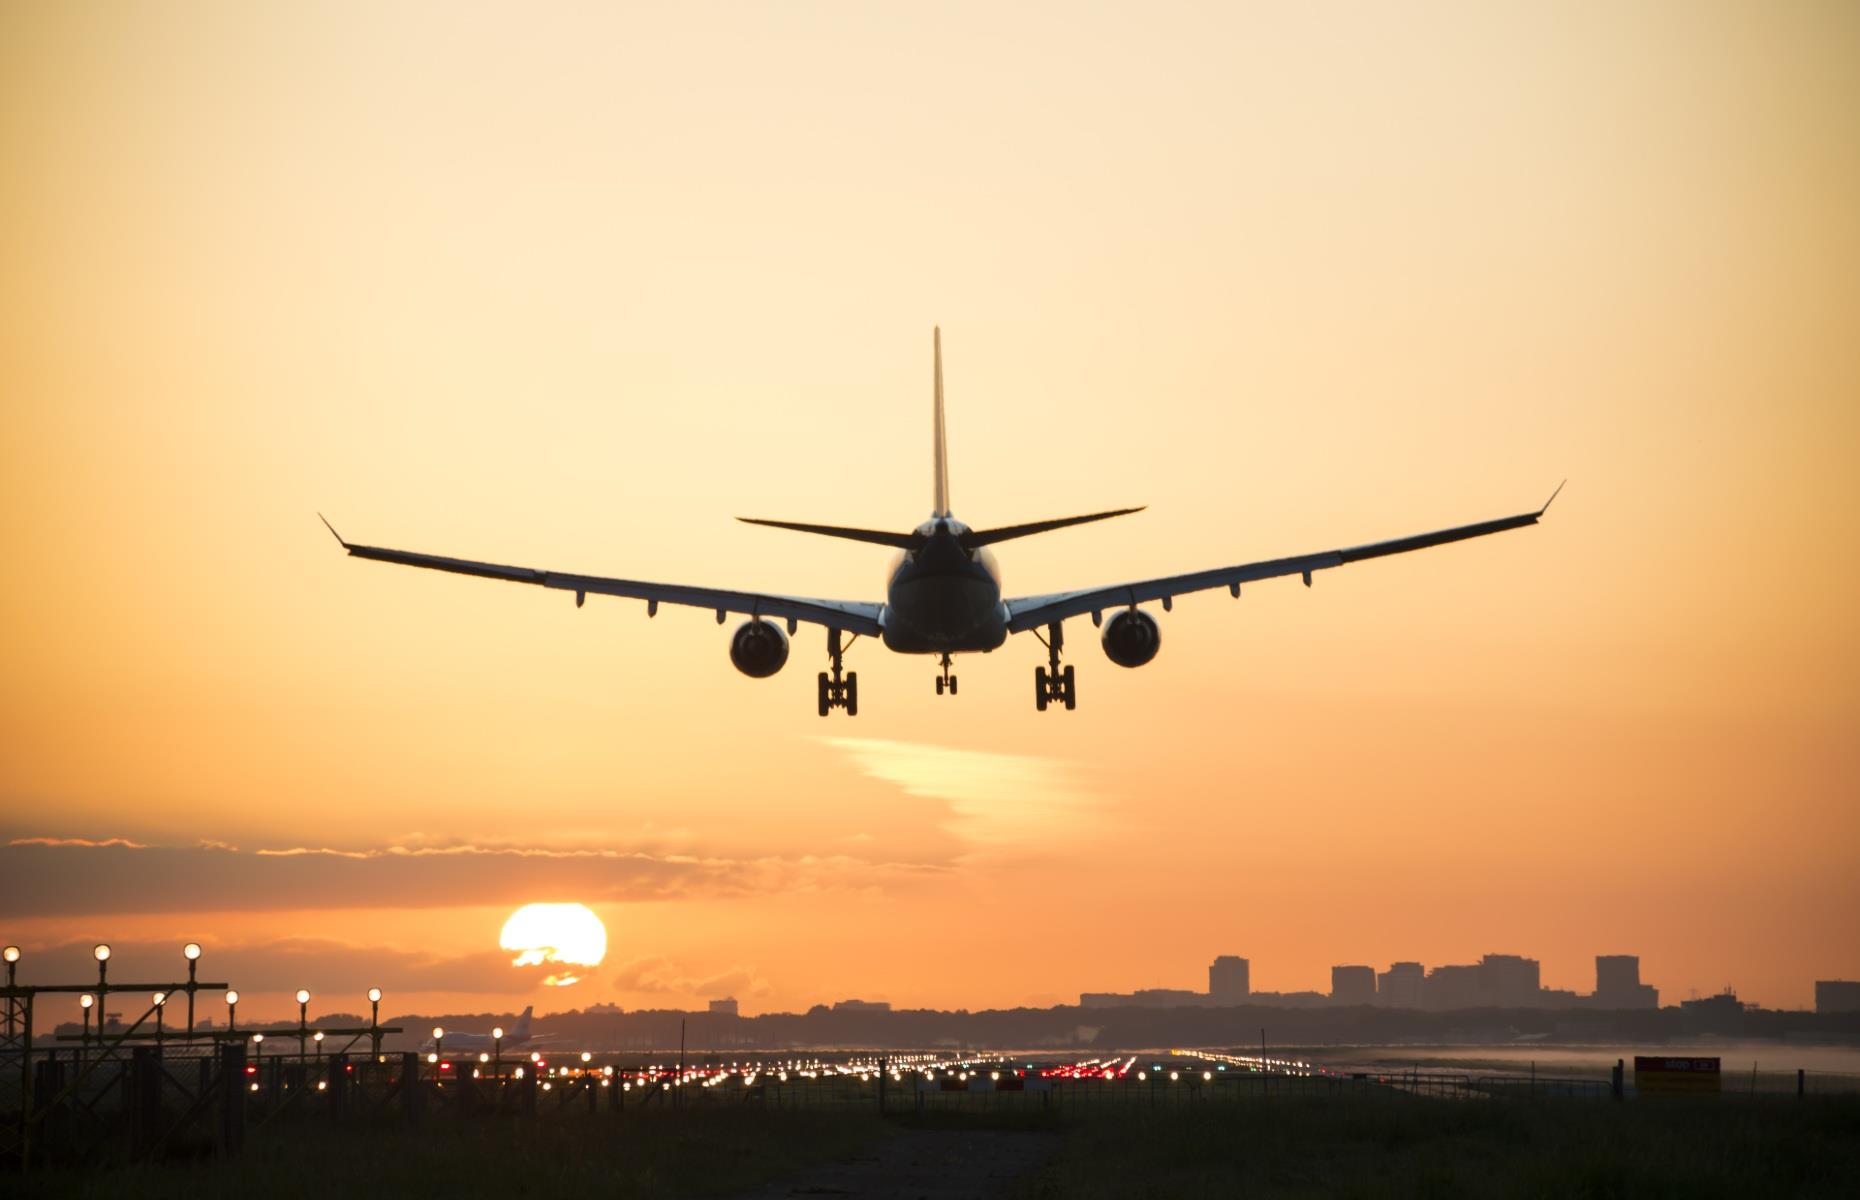 <p>We don't know for sure what the future holds for air travel. But the International Civil Aviation Organisation (ICAO) <a href="https://www.bbc.co.uk/news/science-environment-63165607">recently announced its support for a net zero goal for the aviation industry by 2050</a>. However, environmental campaigners say the plans don't go far enough, believing more measures were needed to ensure the 193 member countries of the ICAO meet the goal and hold airlines accountable. </p>  <p><a href="https://www.loveexploring.com/galleries/151324/mesmerising-images-from-the-drone-photo-awards-2022?page=1"><strong>Now check out the mesmerizing photos from the Drone Photography Awards</strong></a></p>